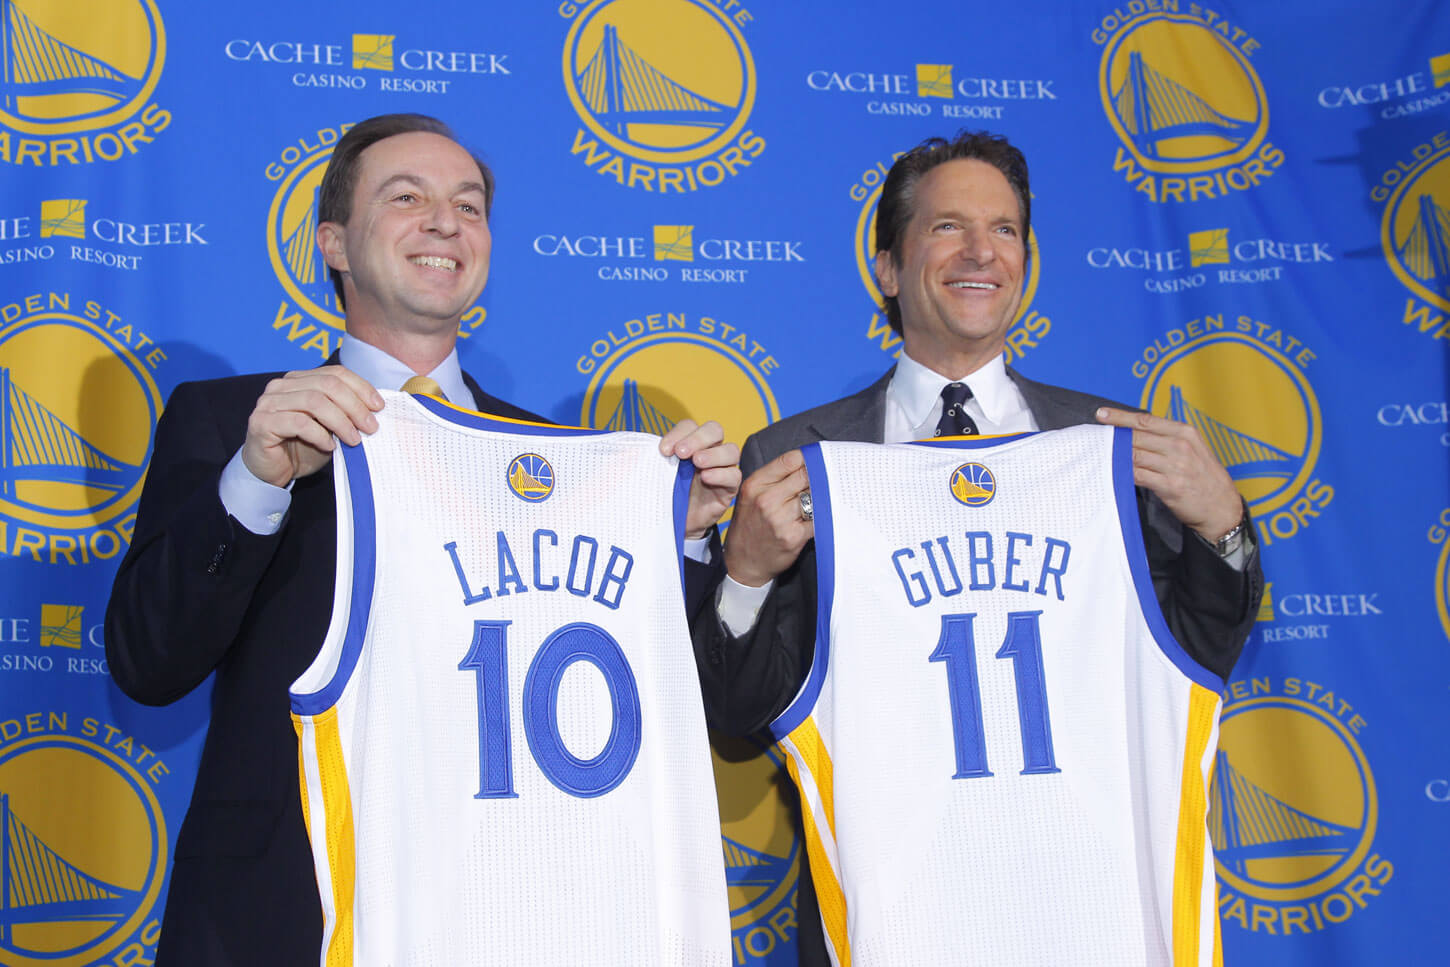 Guber and Lacob Jerseys